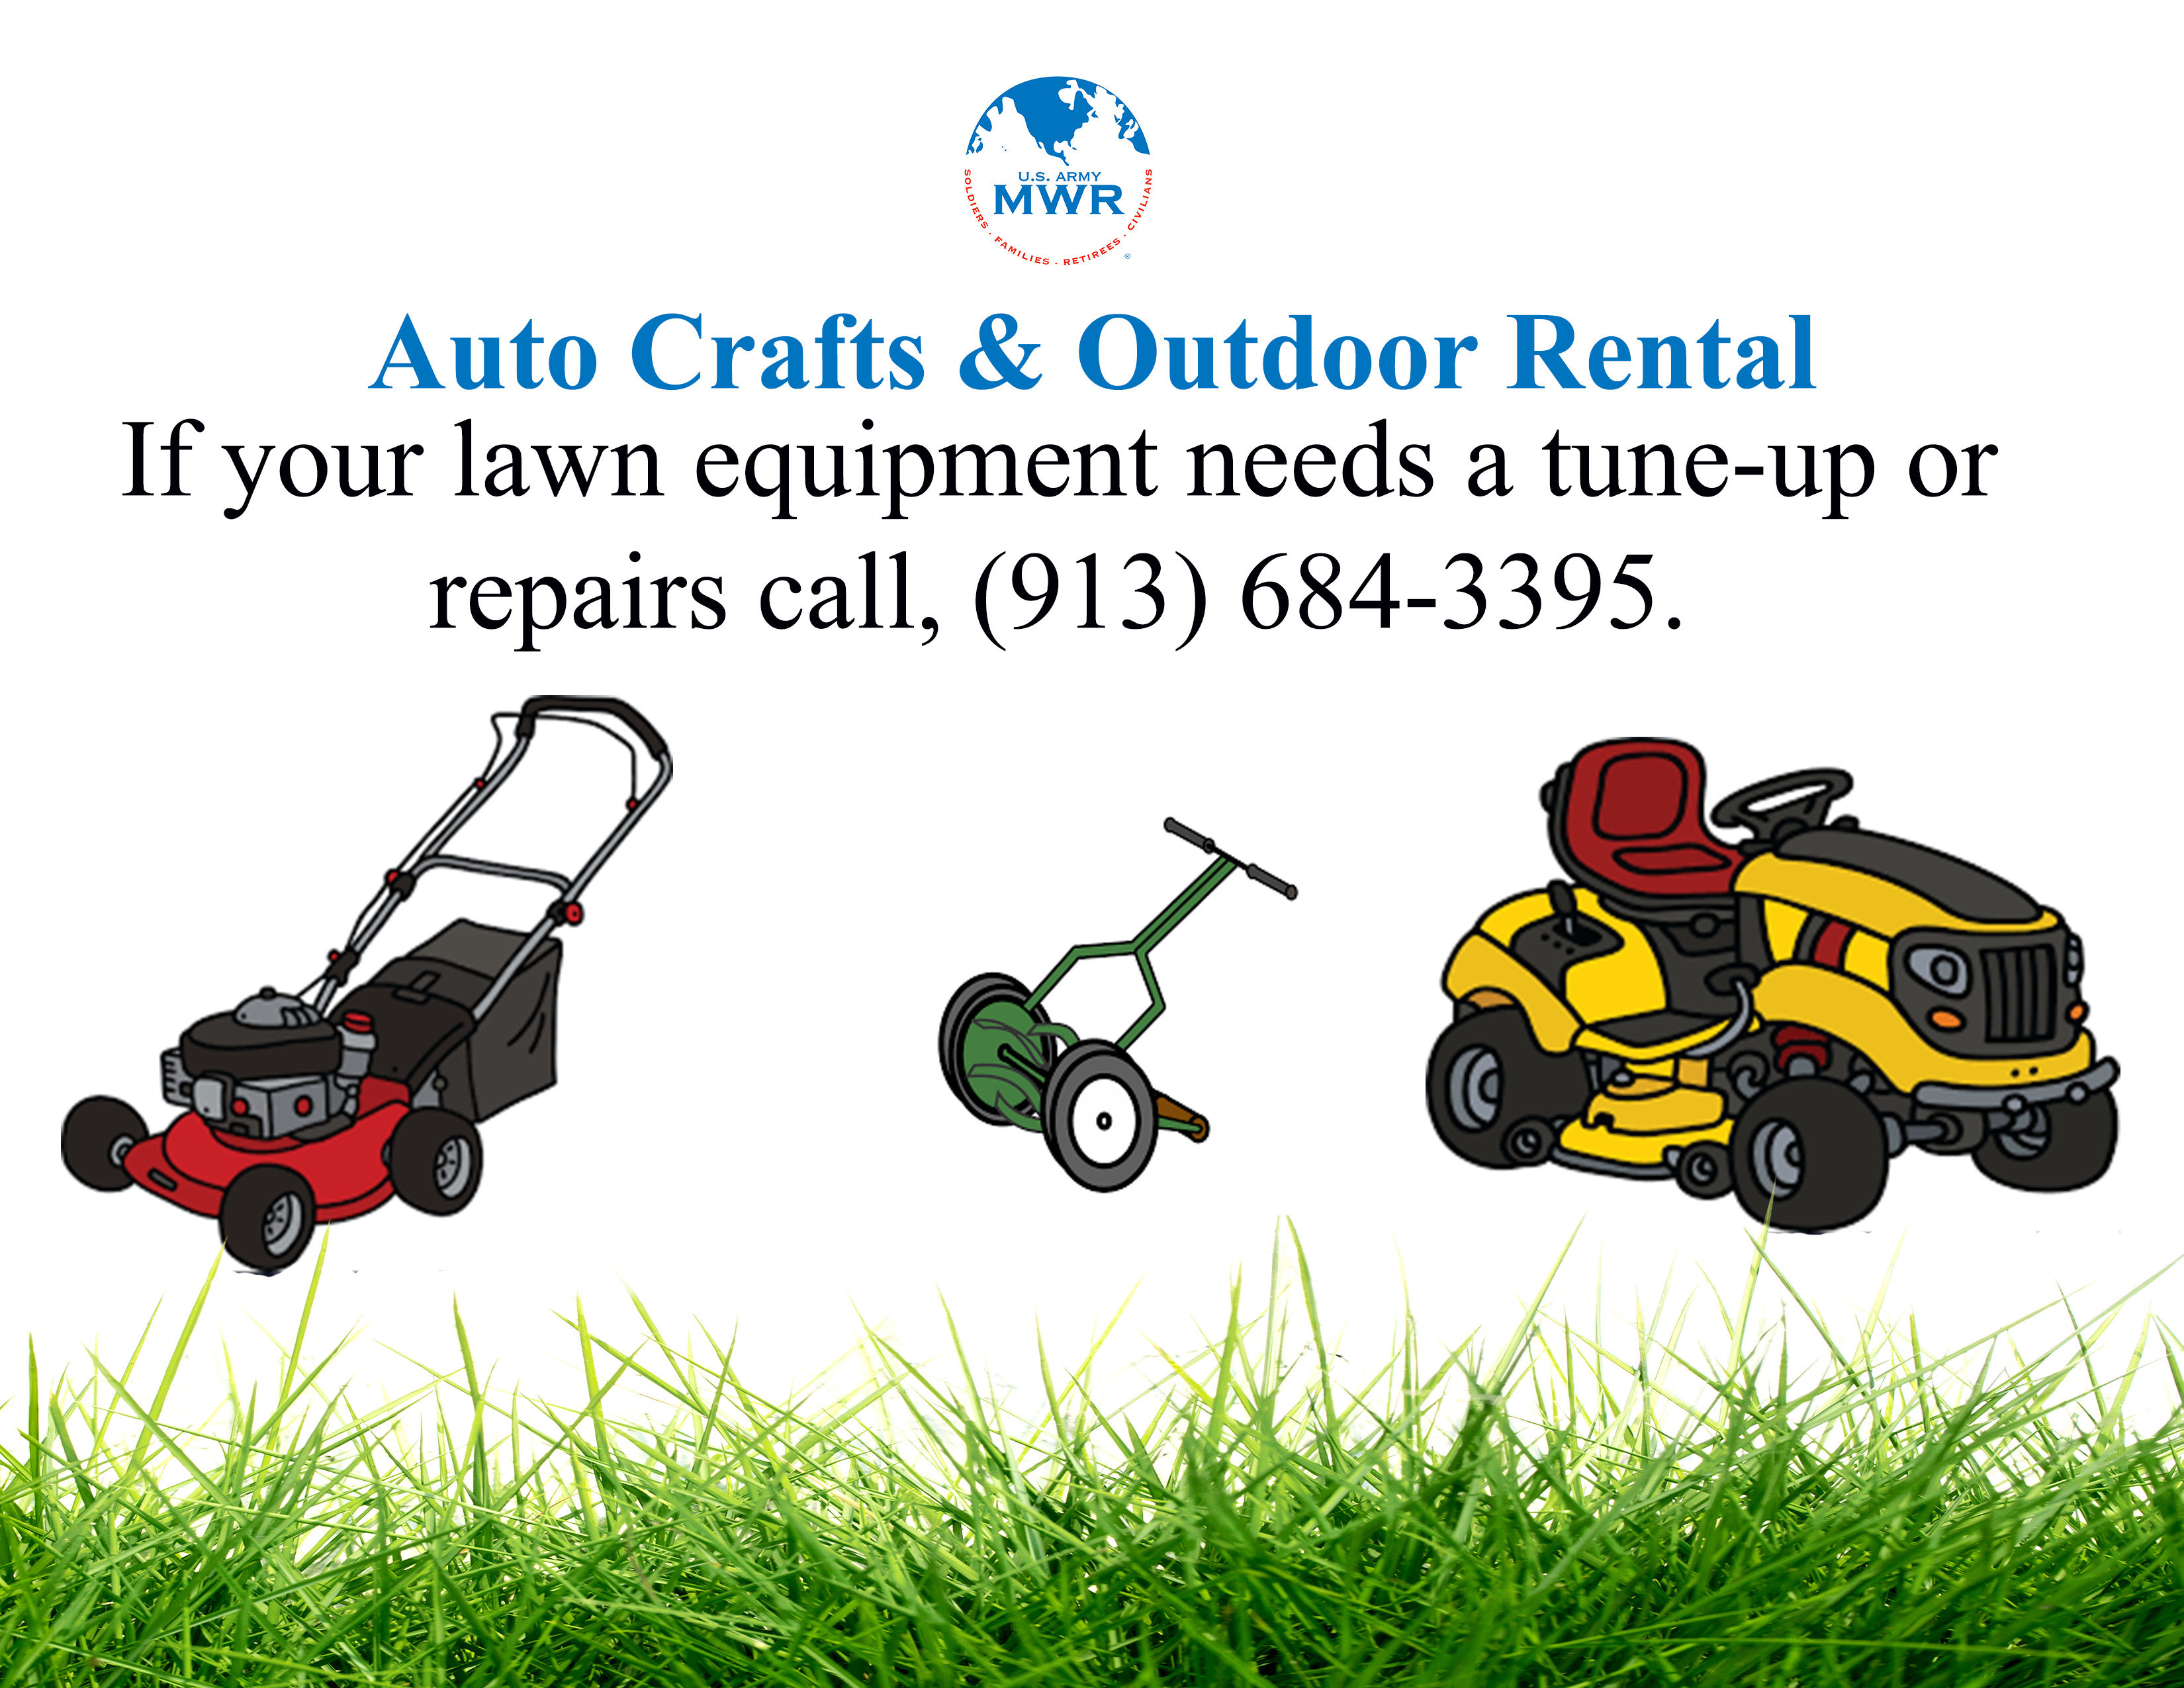 Auto Crafts and Outdoor Rental Lawn Equipment.jpg